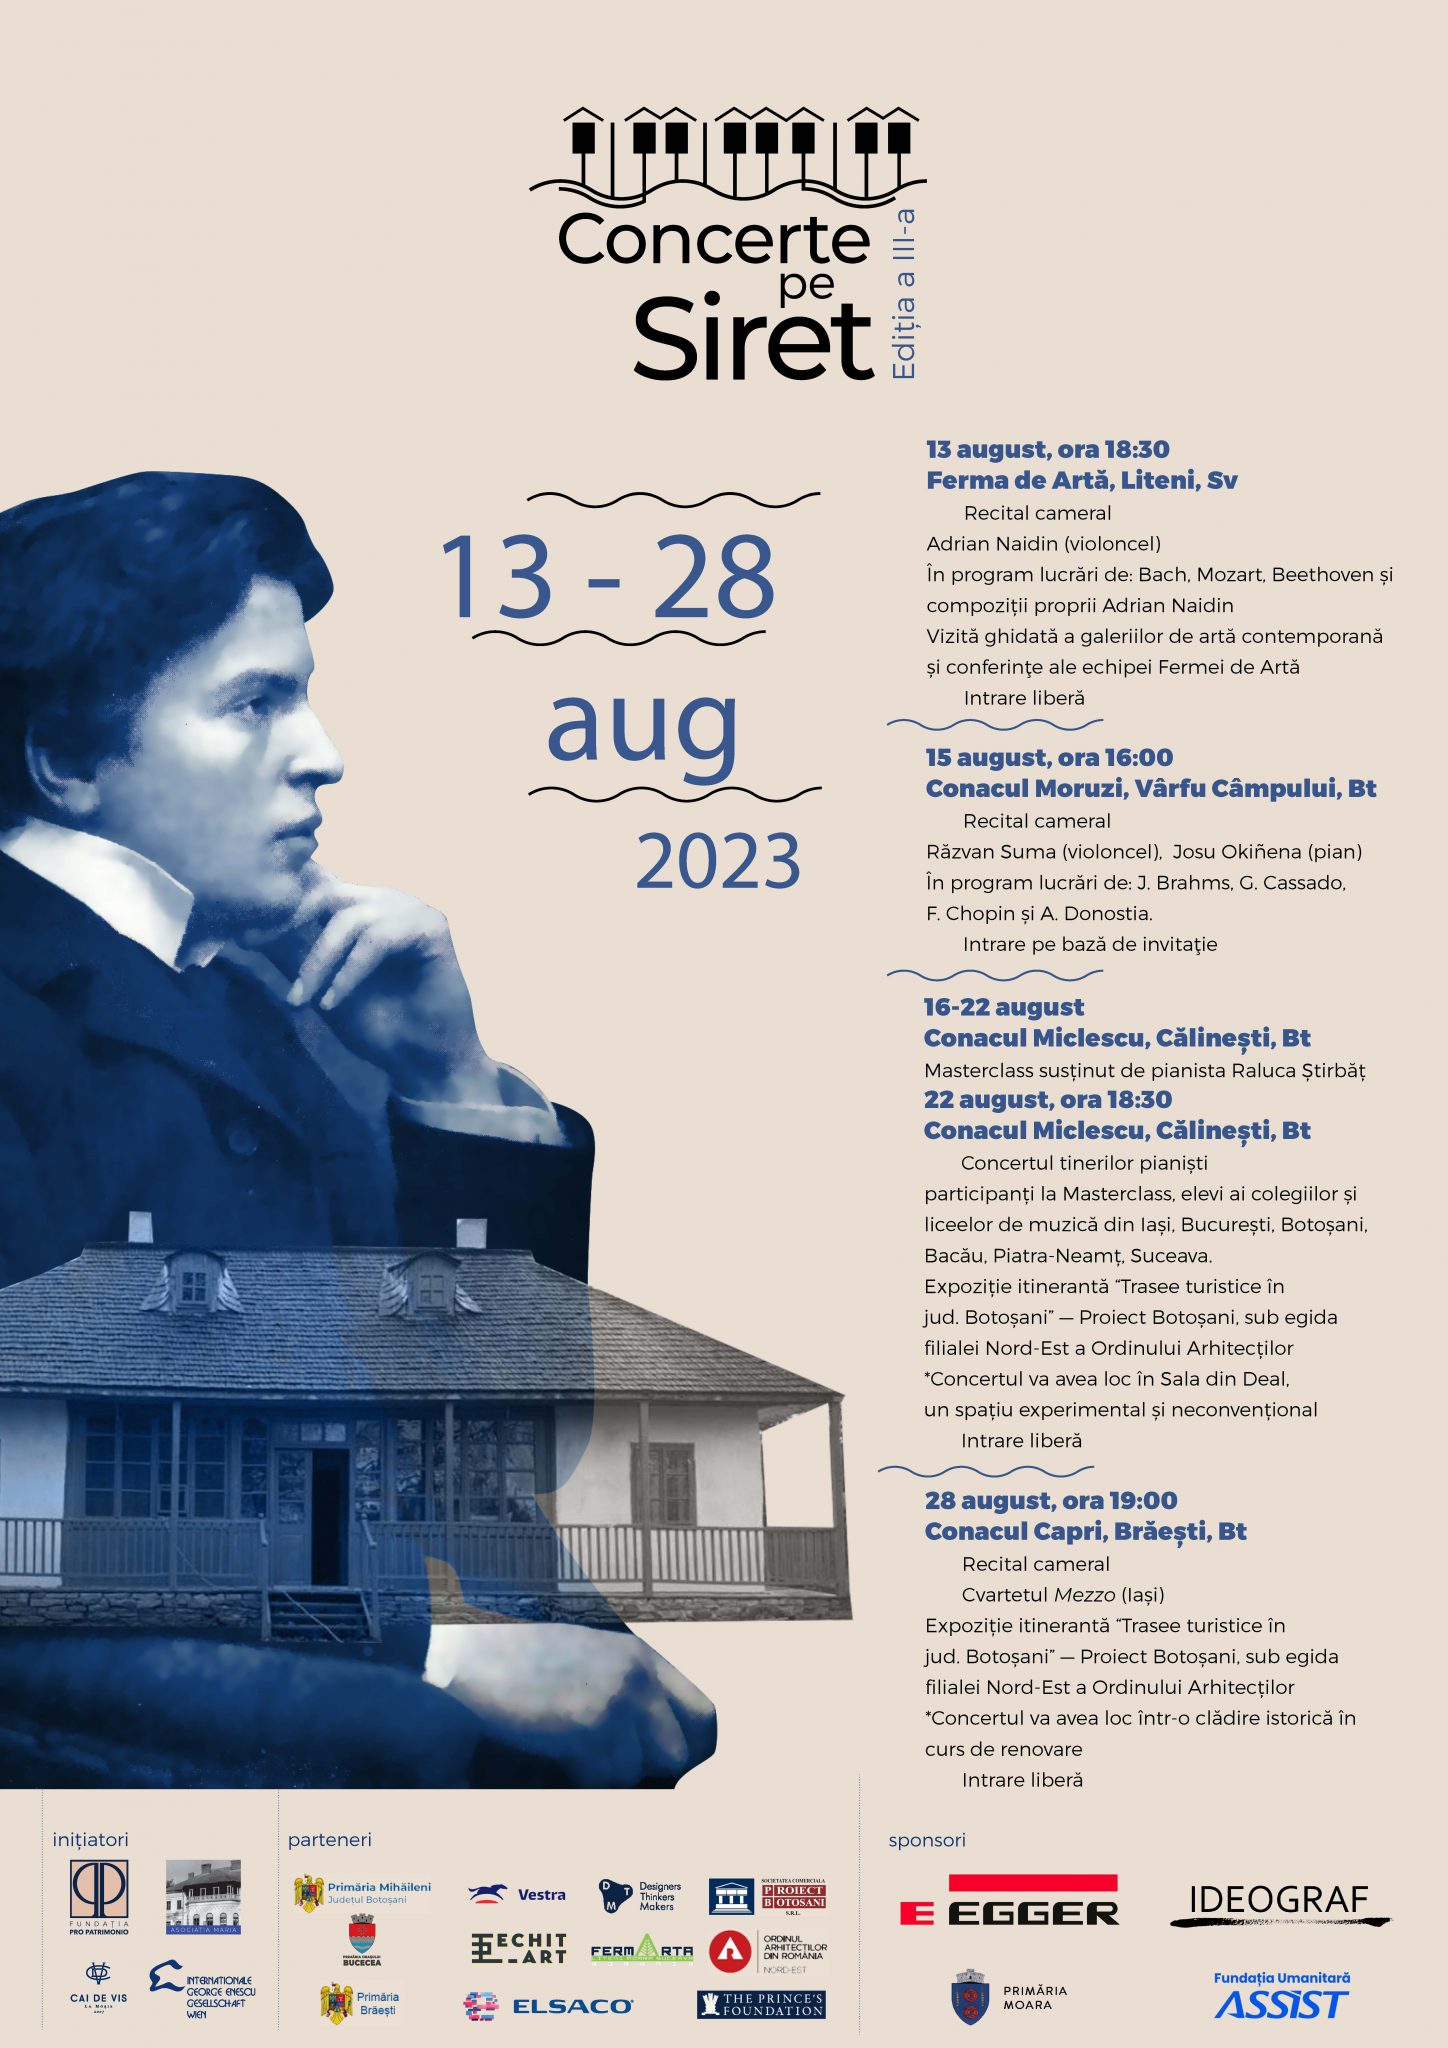 Concerts on the Siret River, 3rd edition